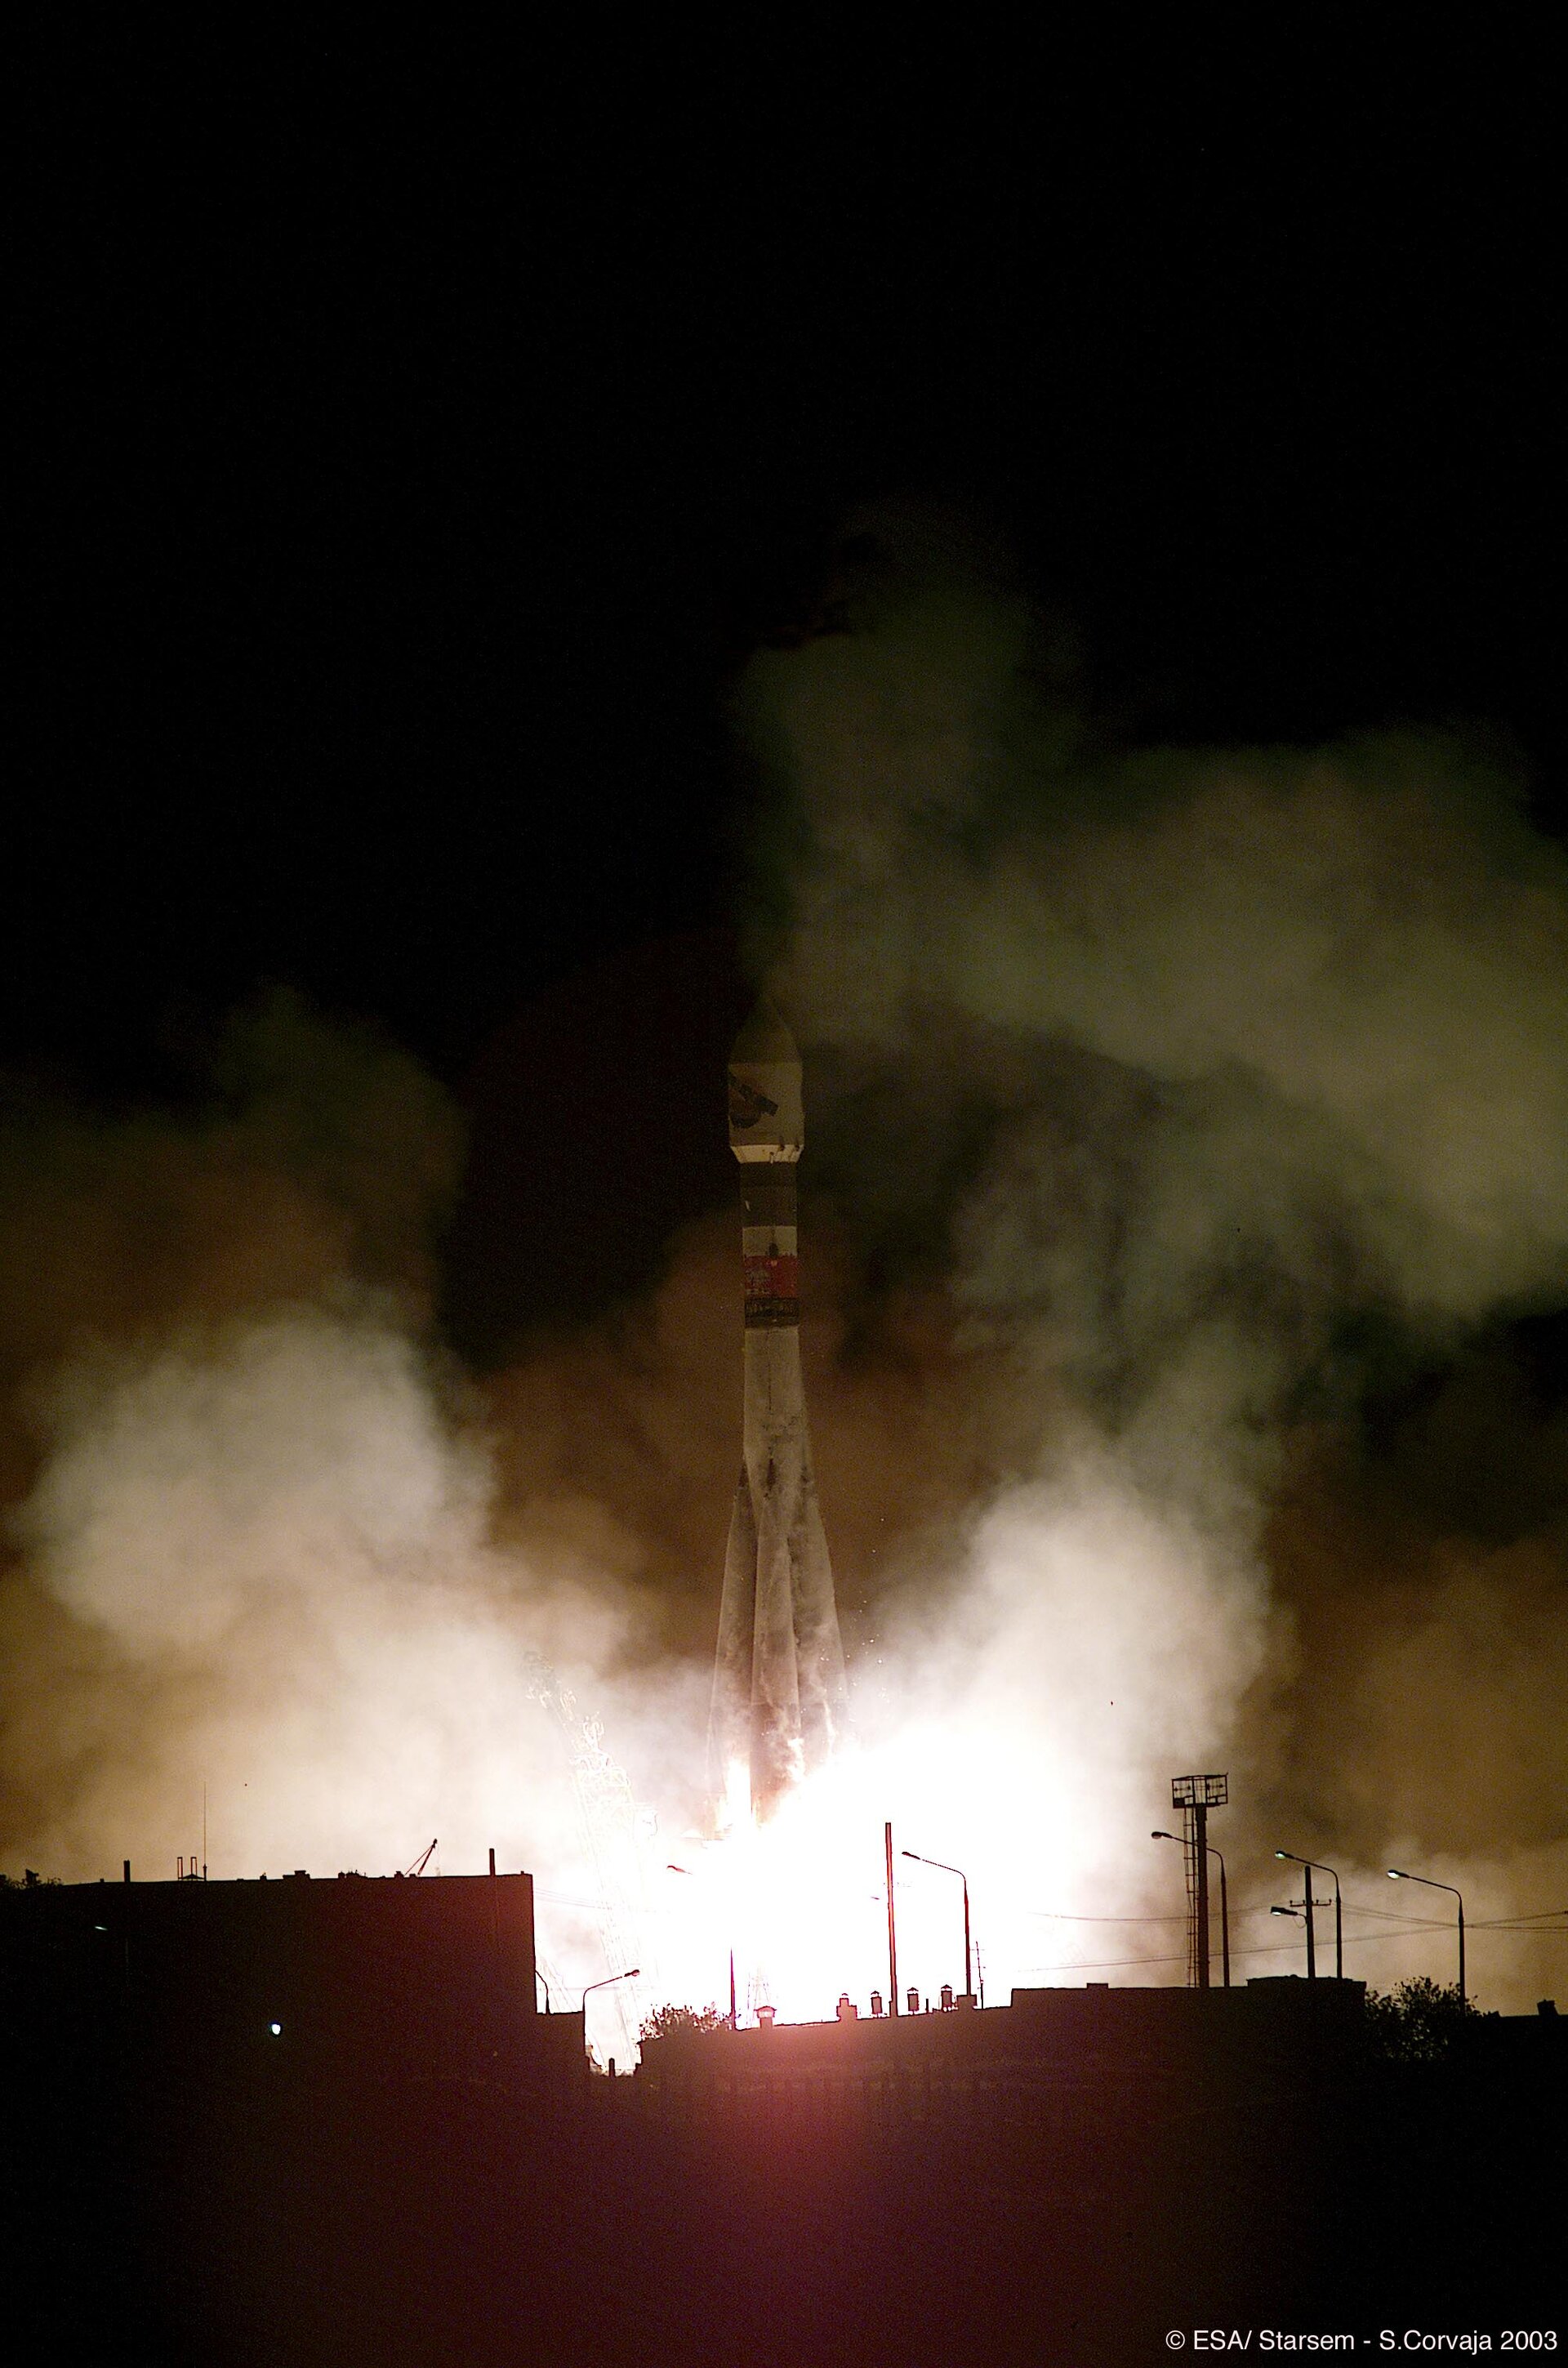 Mars Express was successfully launched from Baikonur at 17:45 GMT